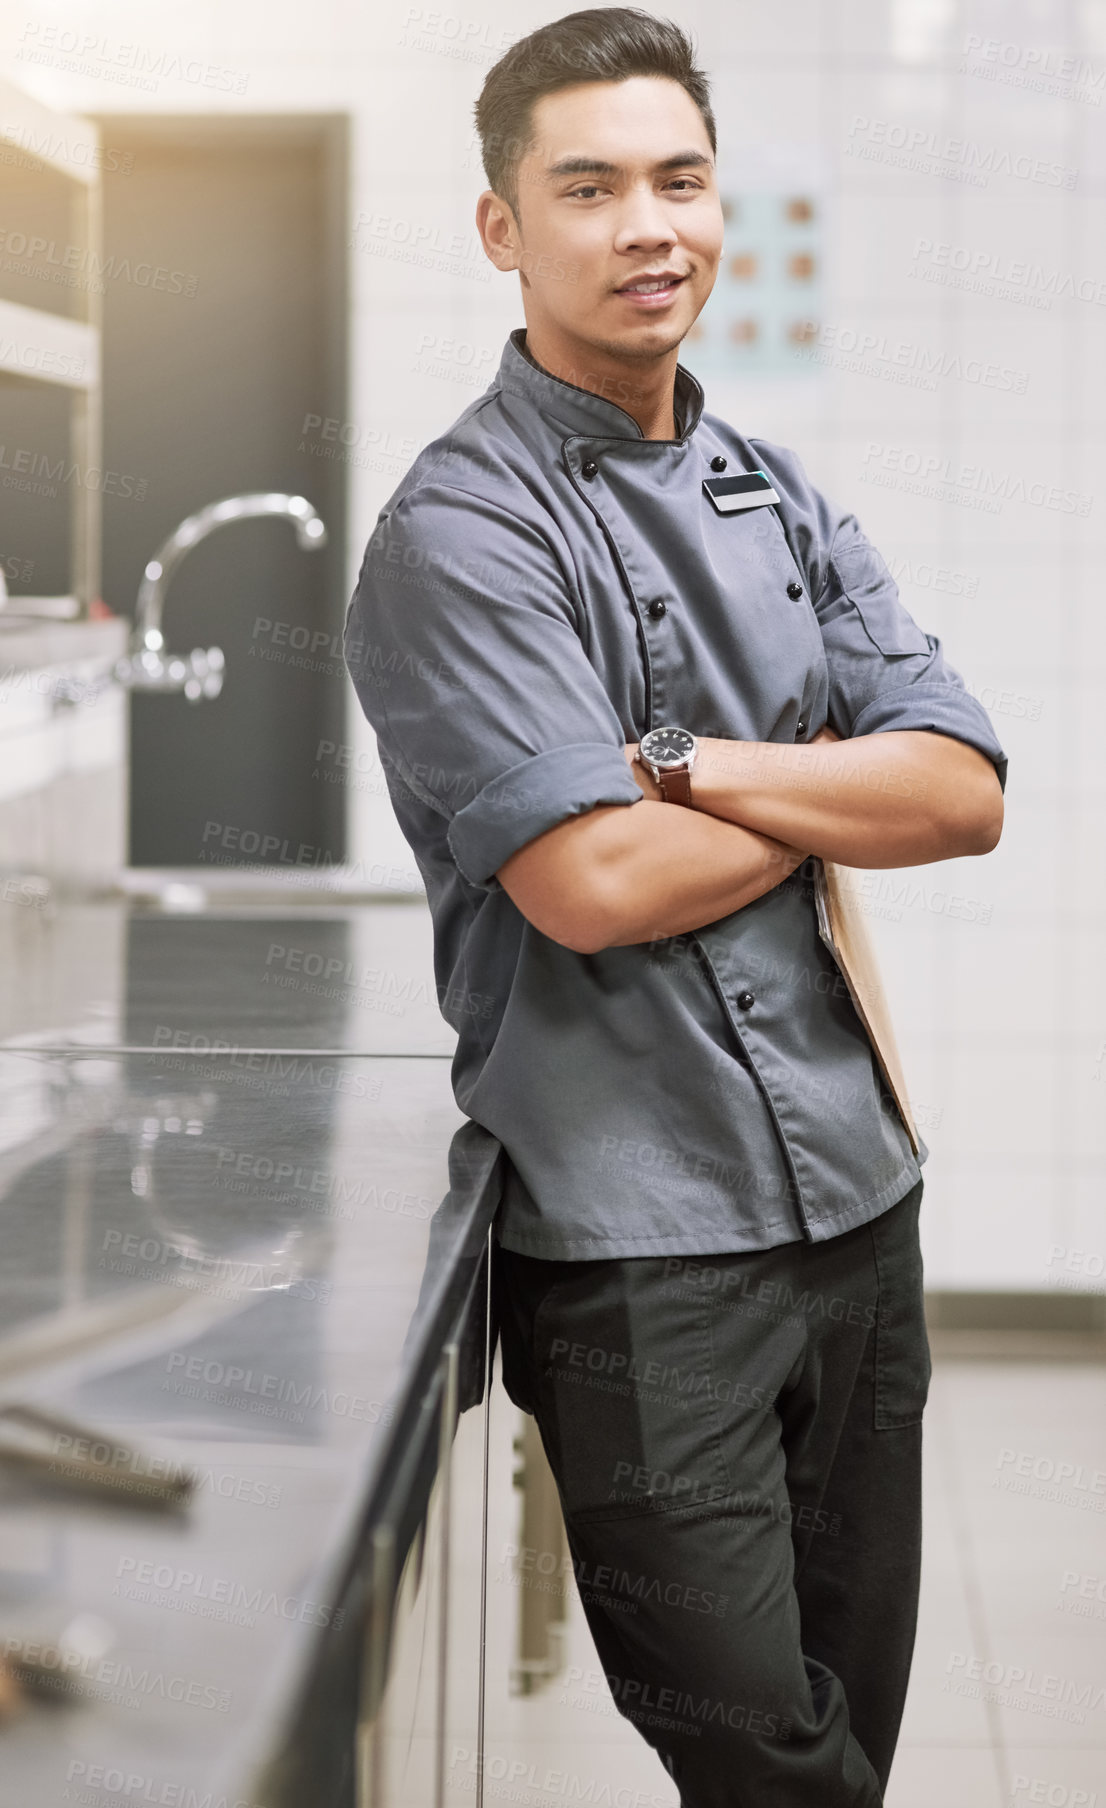 Buy stock photo Cropped portrait of a young male chef standing with his arms folded in the kitchen